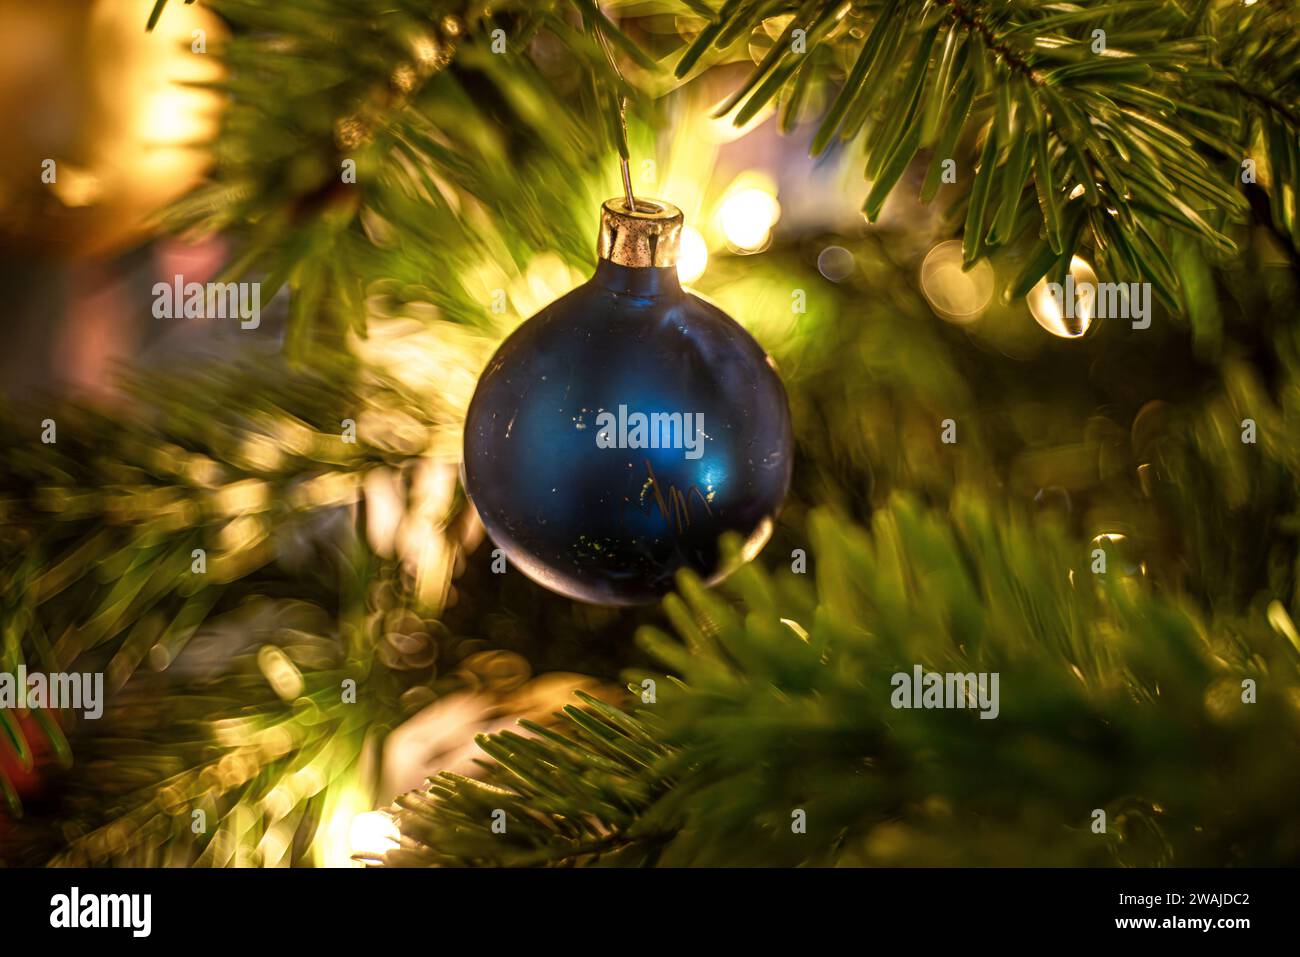 A festive blue Christmas ornament with illuminated lights in the background, creates a warm atmosphere Stock Photo